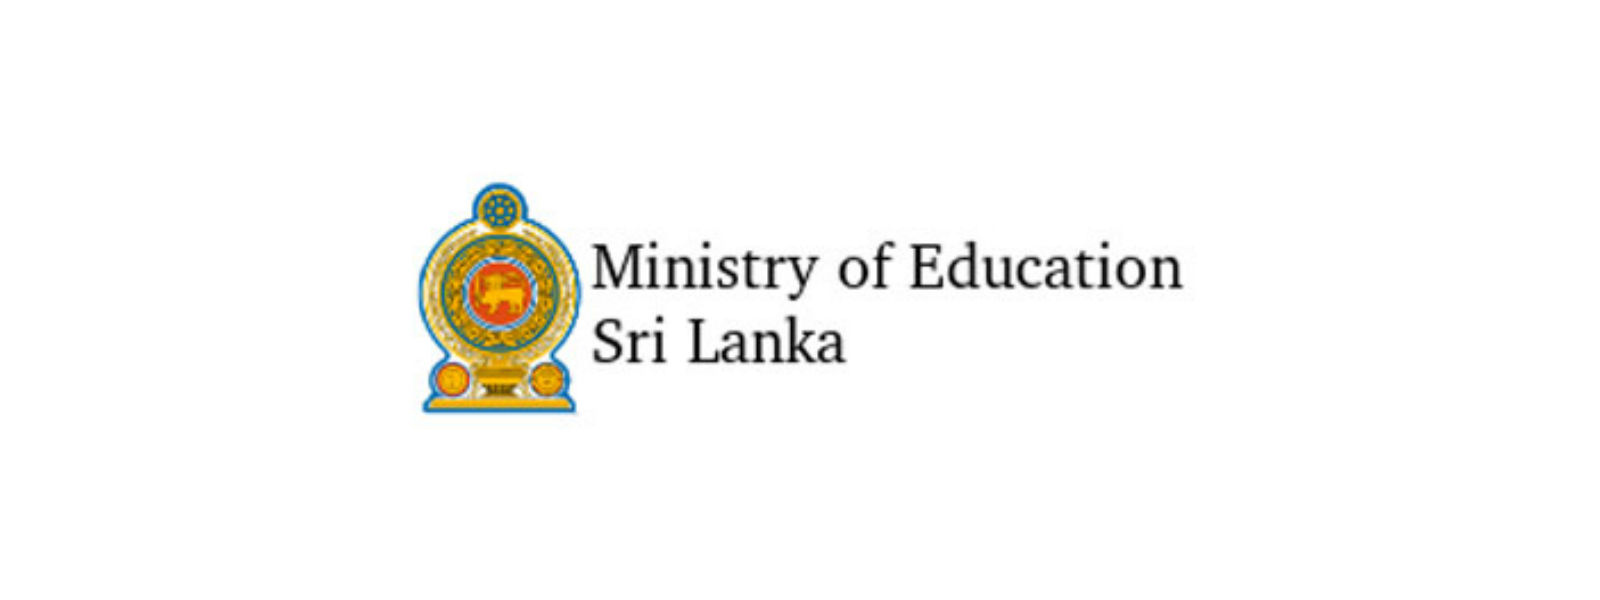 Applications for Grade 06 admission now available : Education Ministry